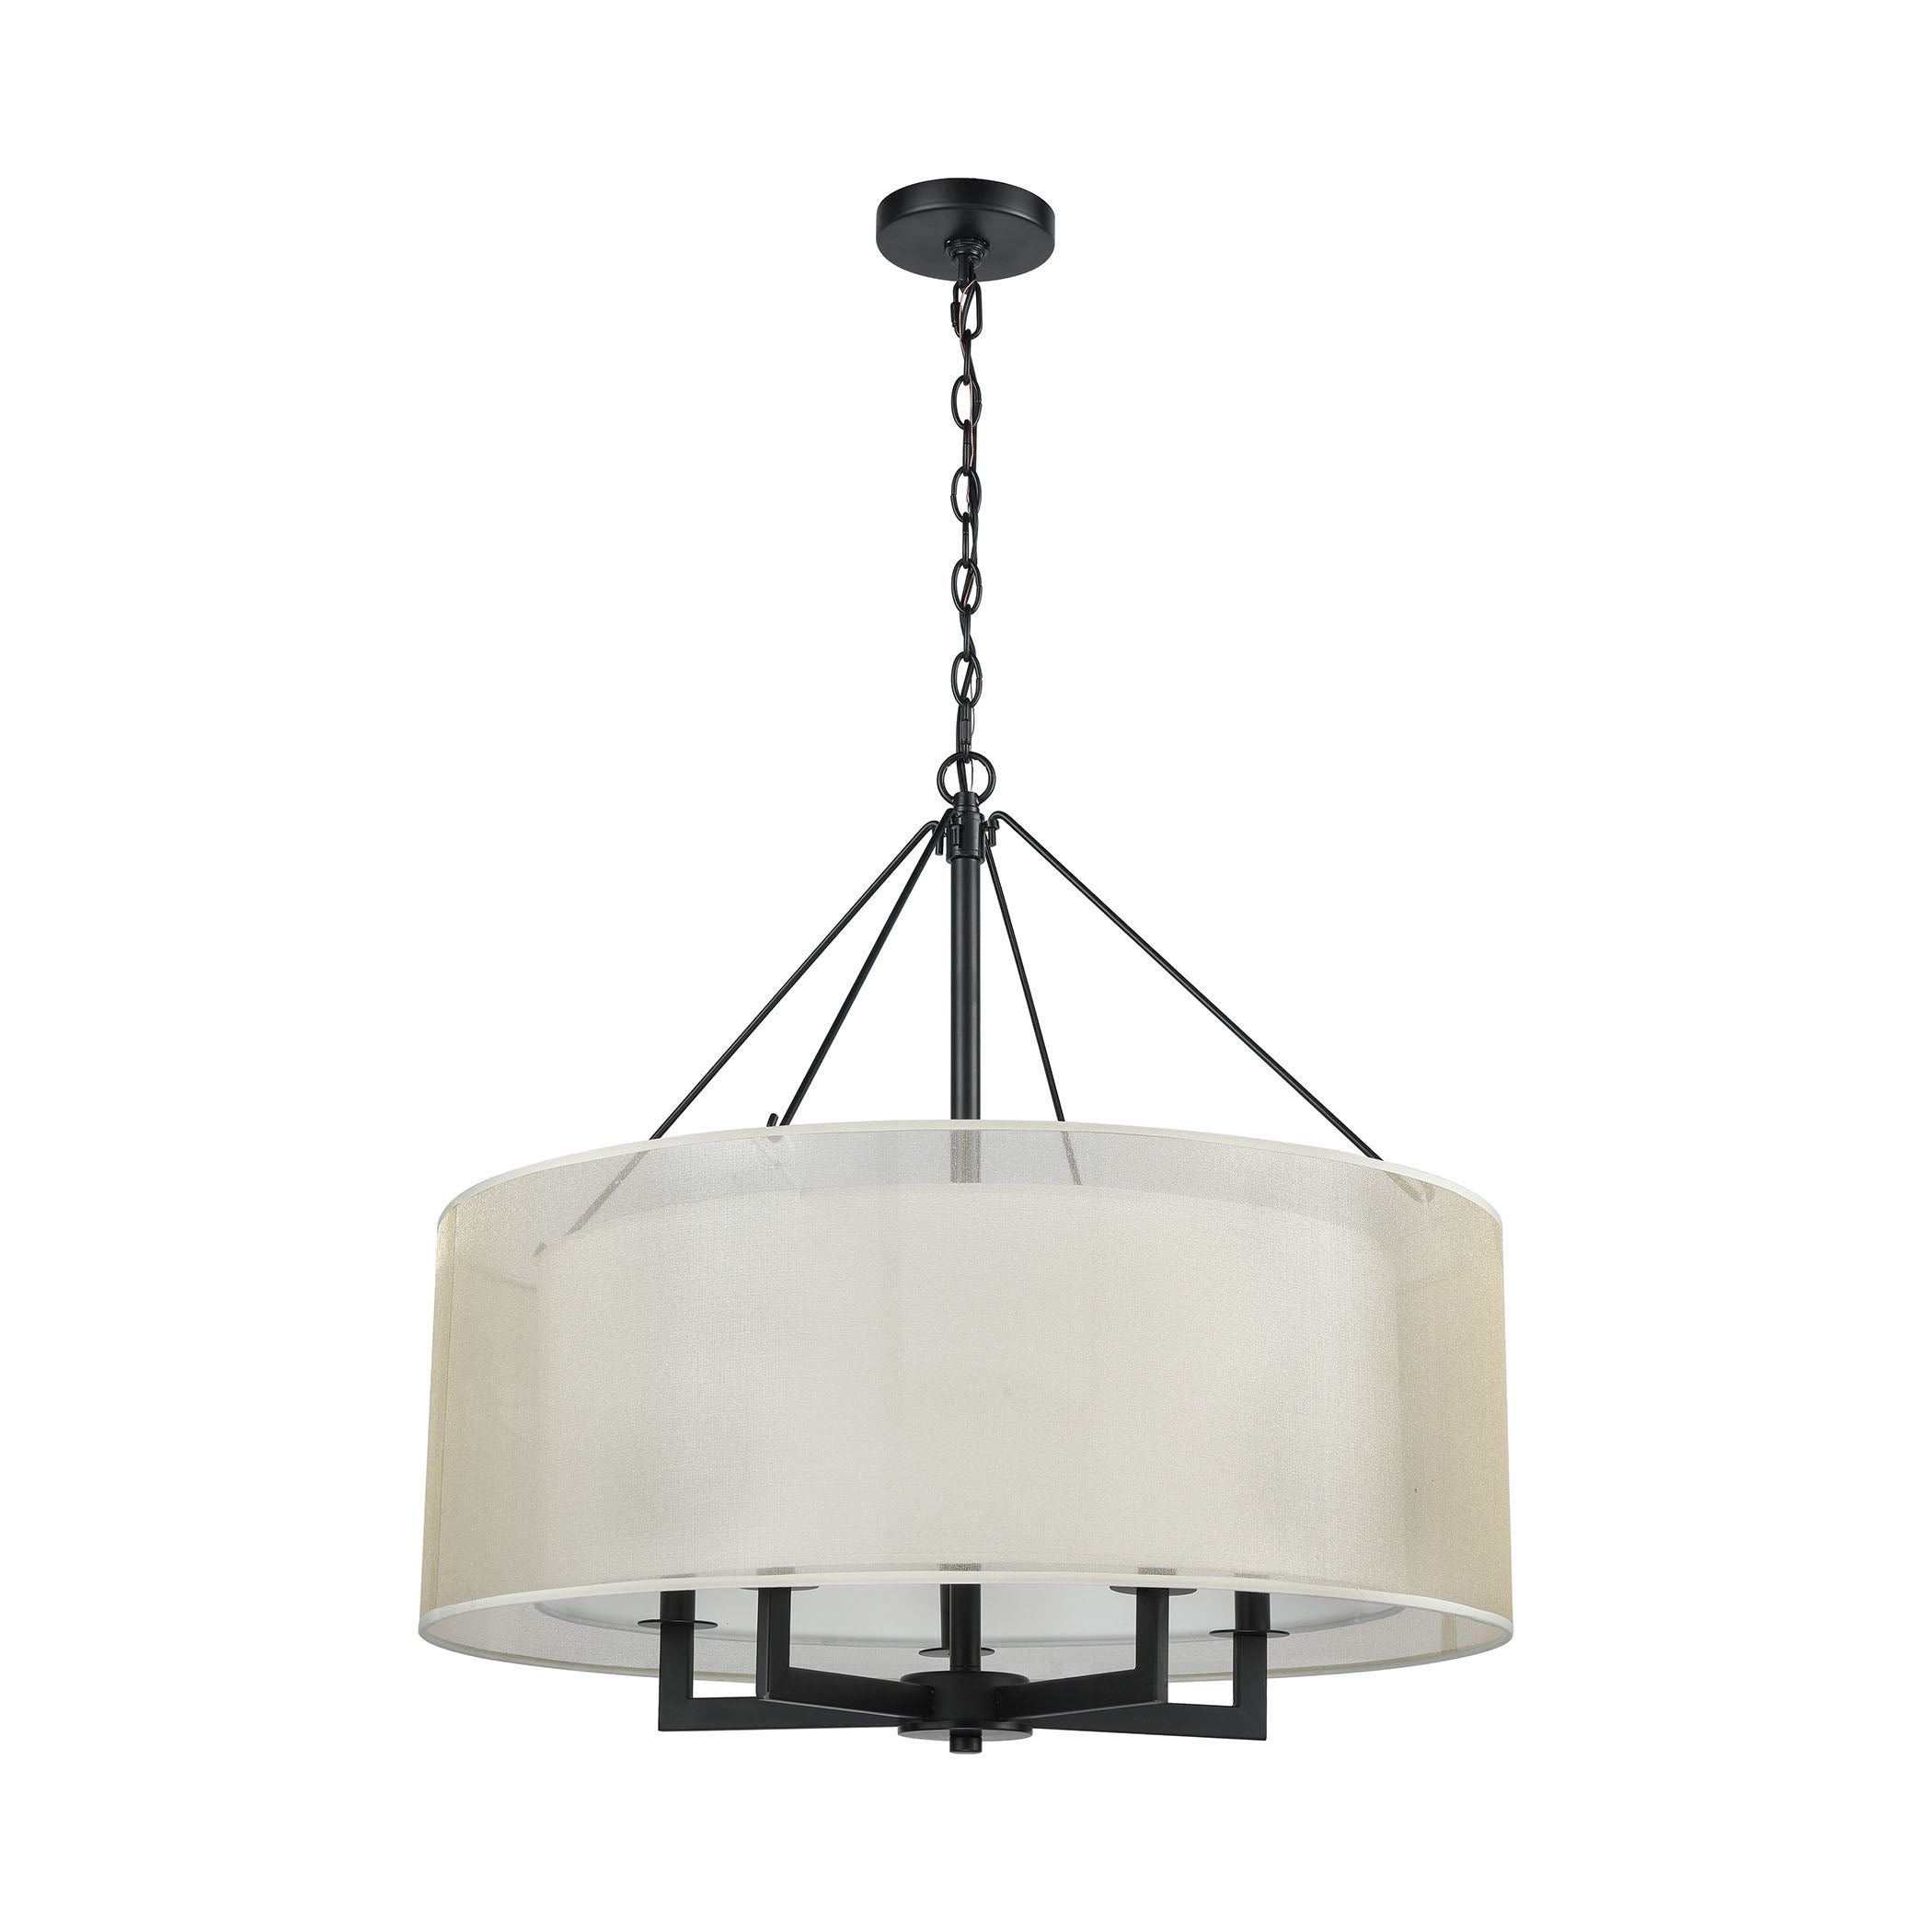 ELK Lighting 46268/5 Ashland 5-Light Chandelier in Matte Black with Webbed Organza and White Fabric Shade